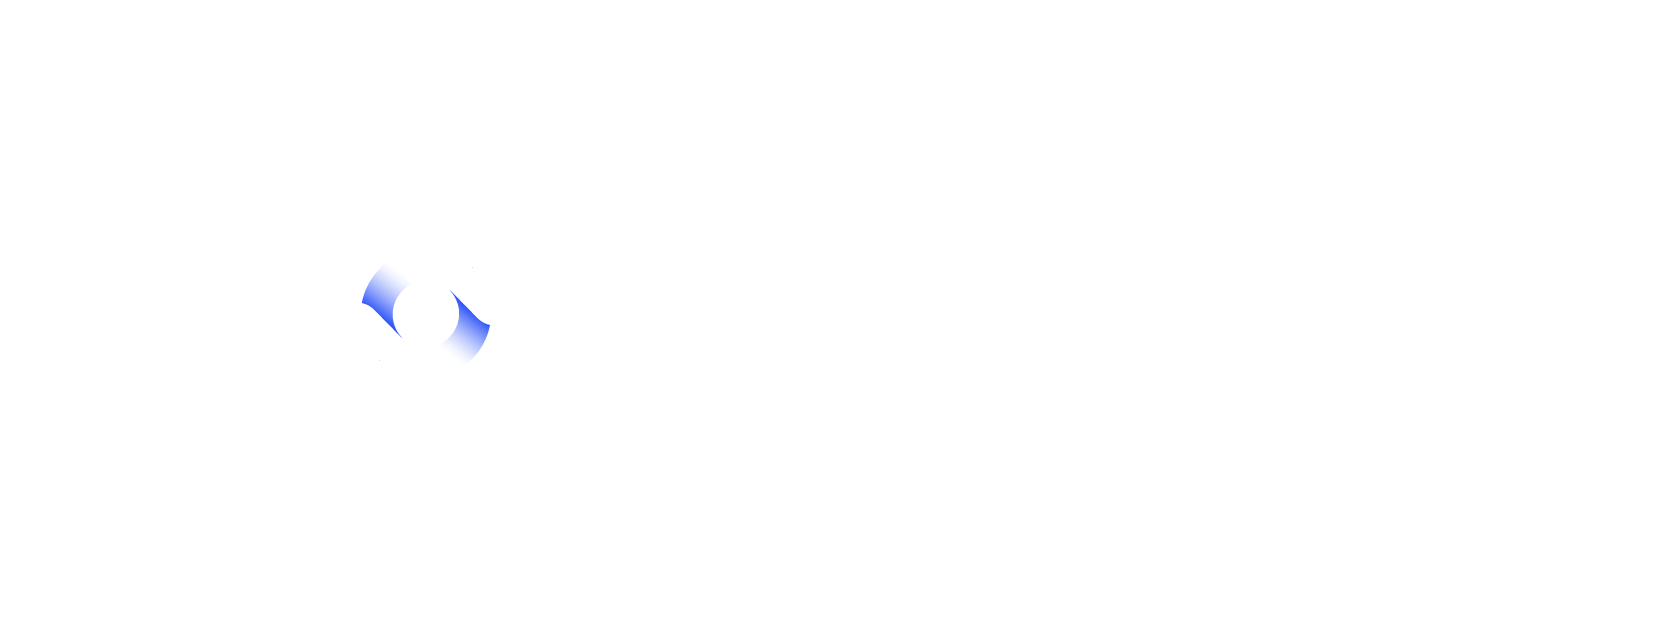 AuditBoard Expands Leadership Team to Support Continued Rapid Growth